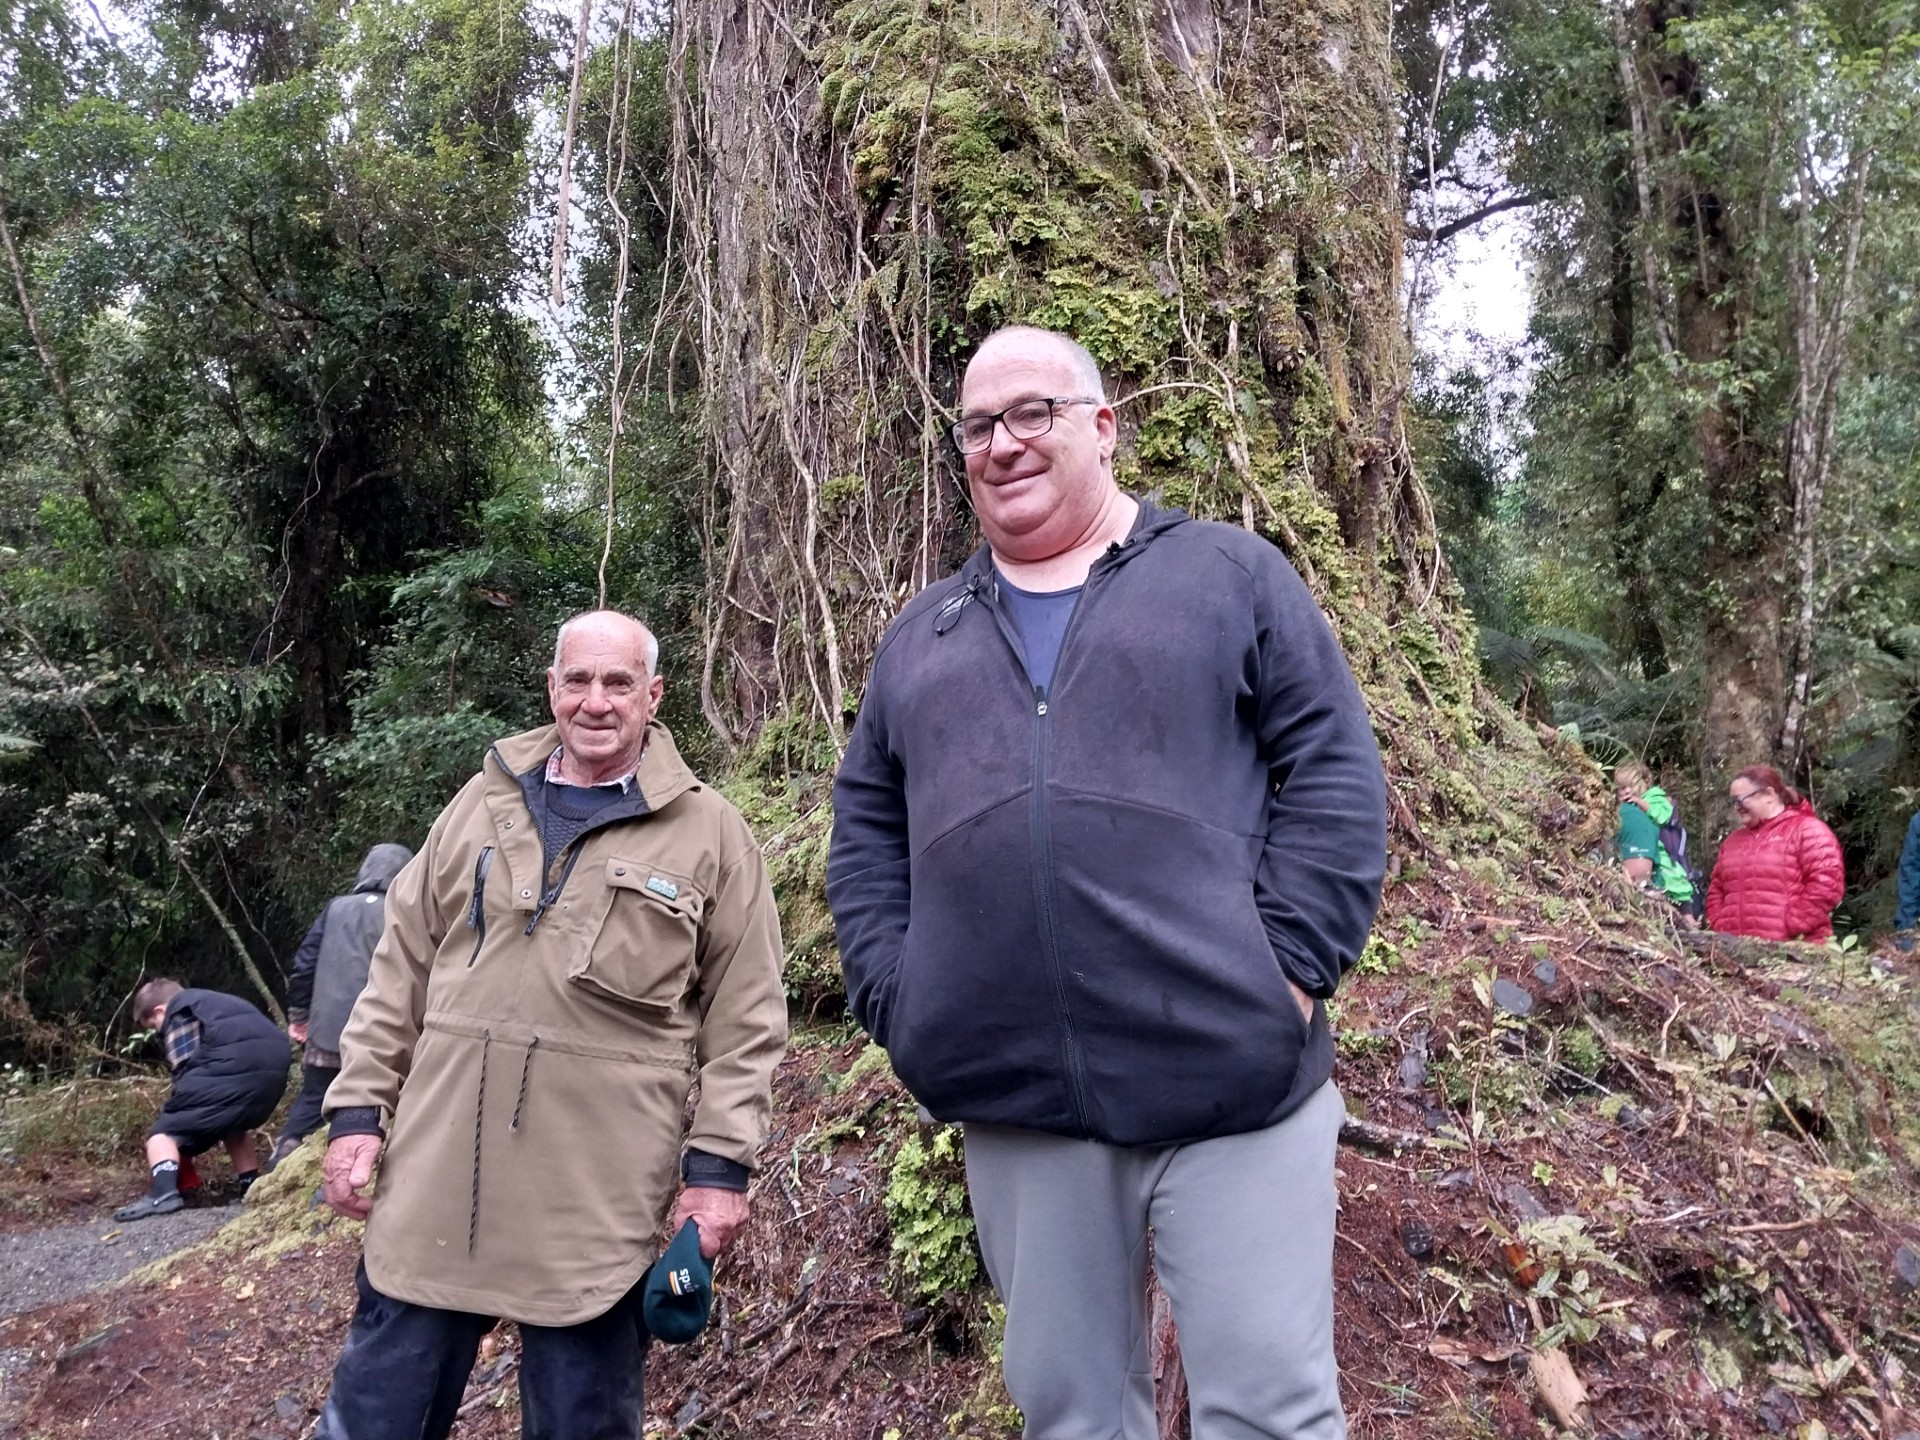 Huge forest giant found; walk opened - Greymouth Star